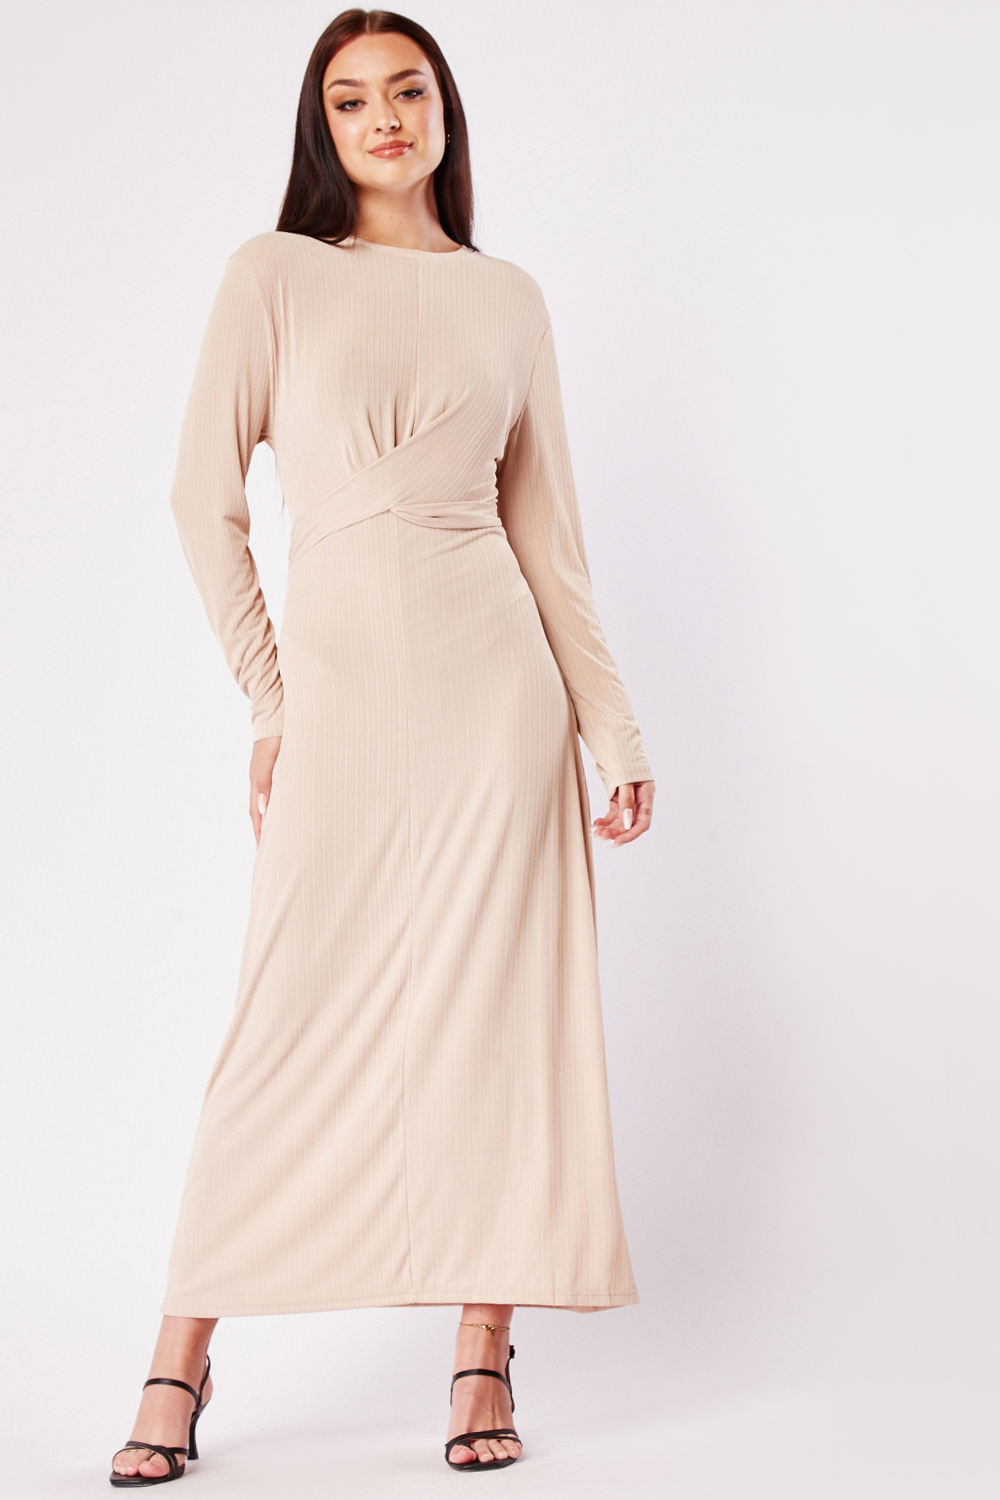 Textured Twisted Front Long Sleeve Dress